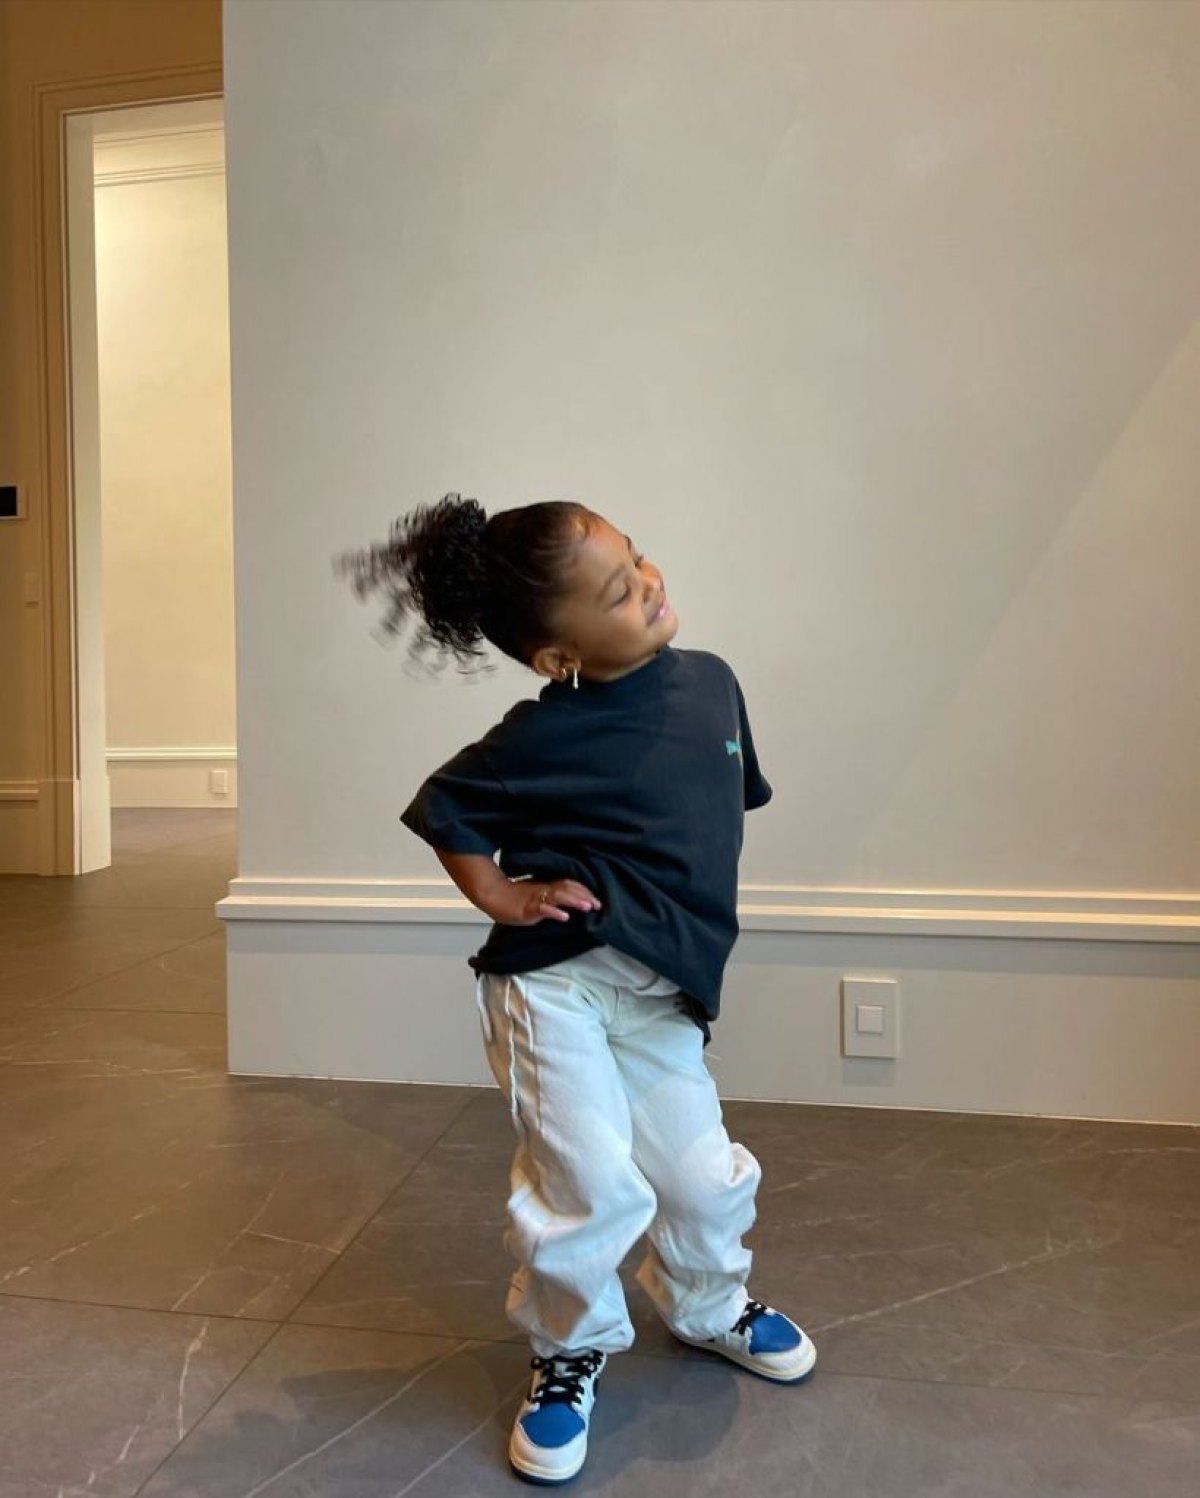 Kylie Jenner's Tracksuit With Baby Stormi